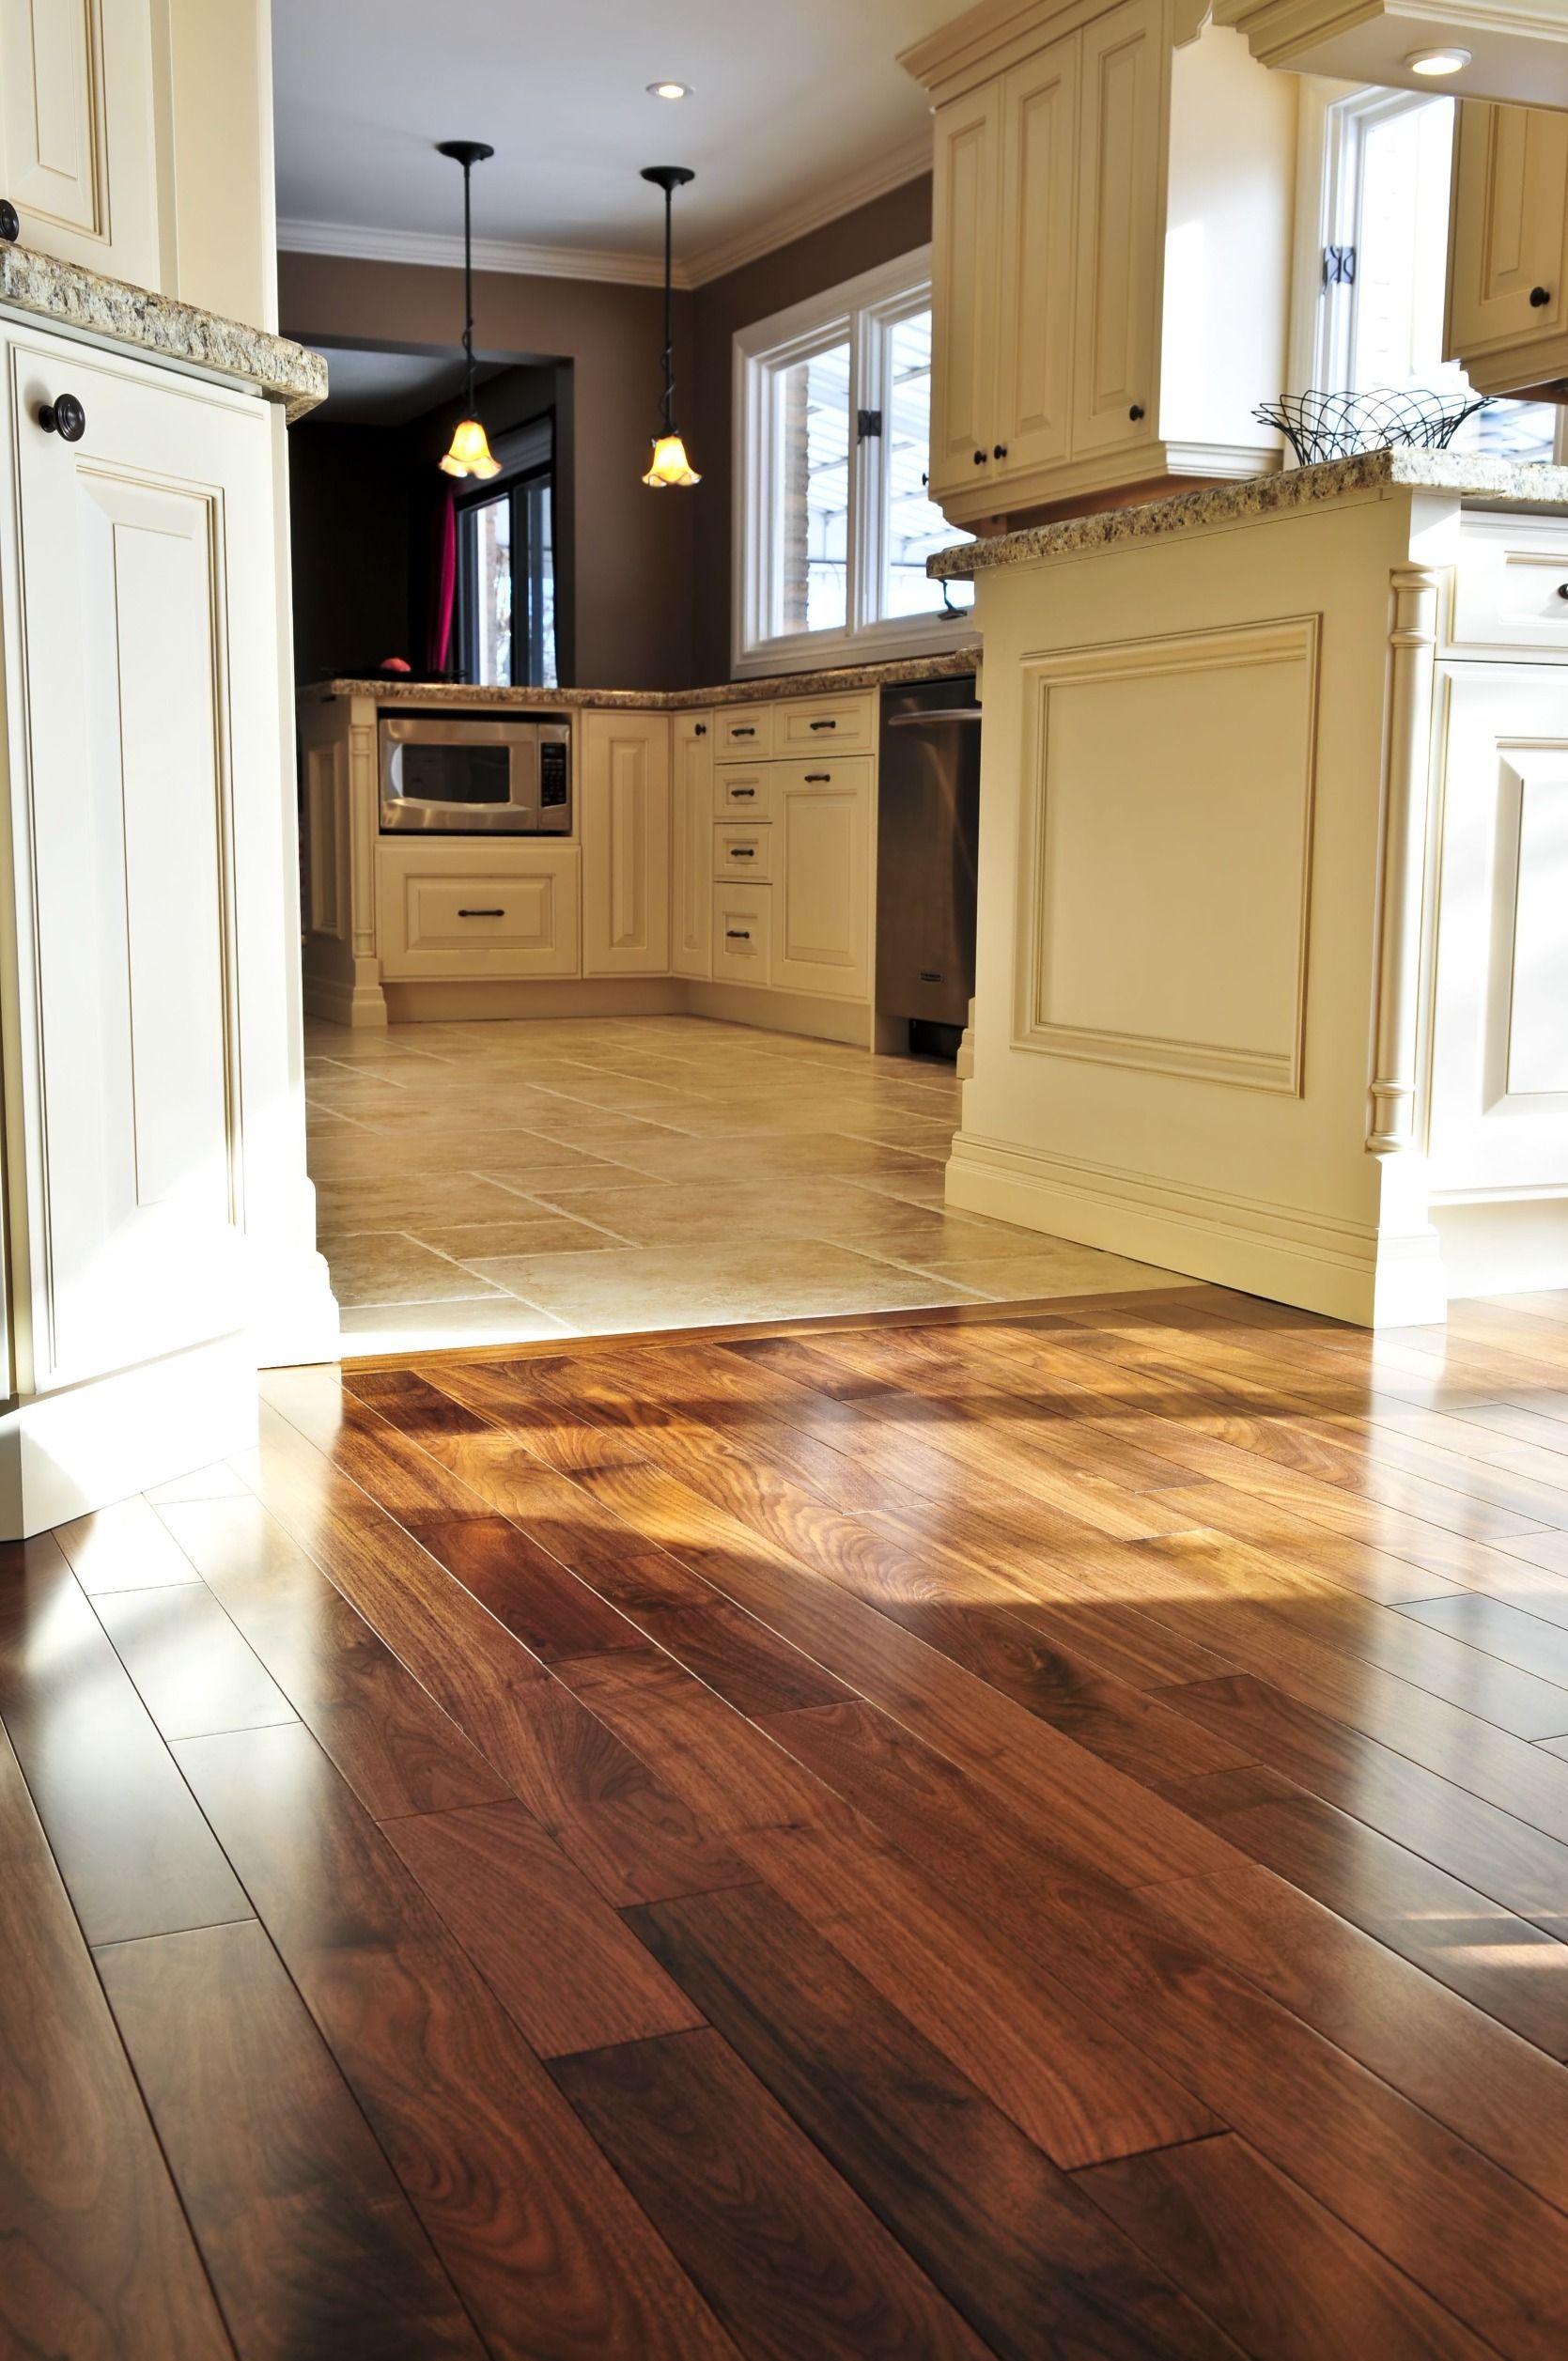 Best Flooring Guide: The Different Types of Floor Options for Your Home